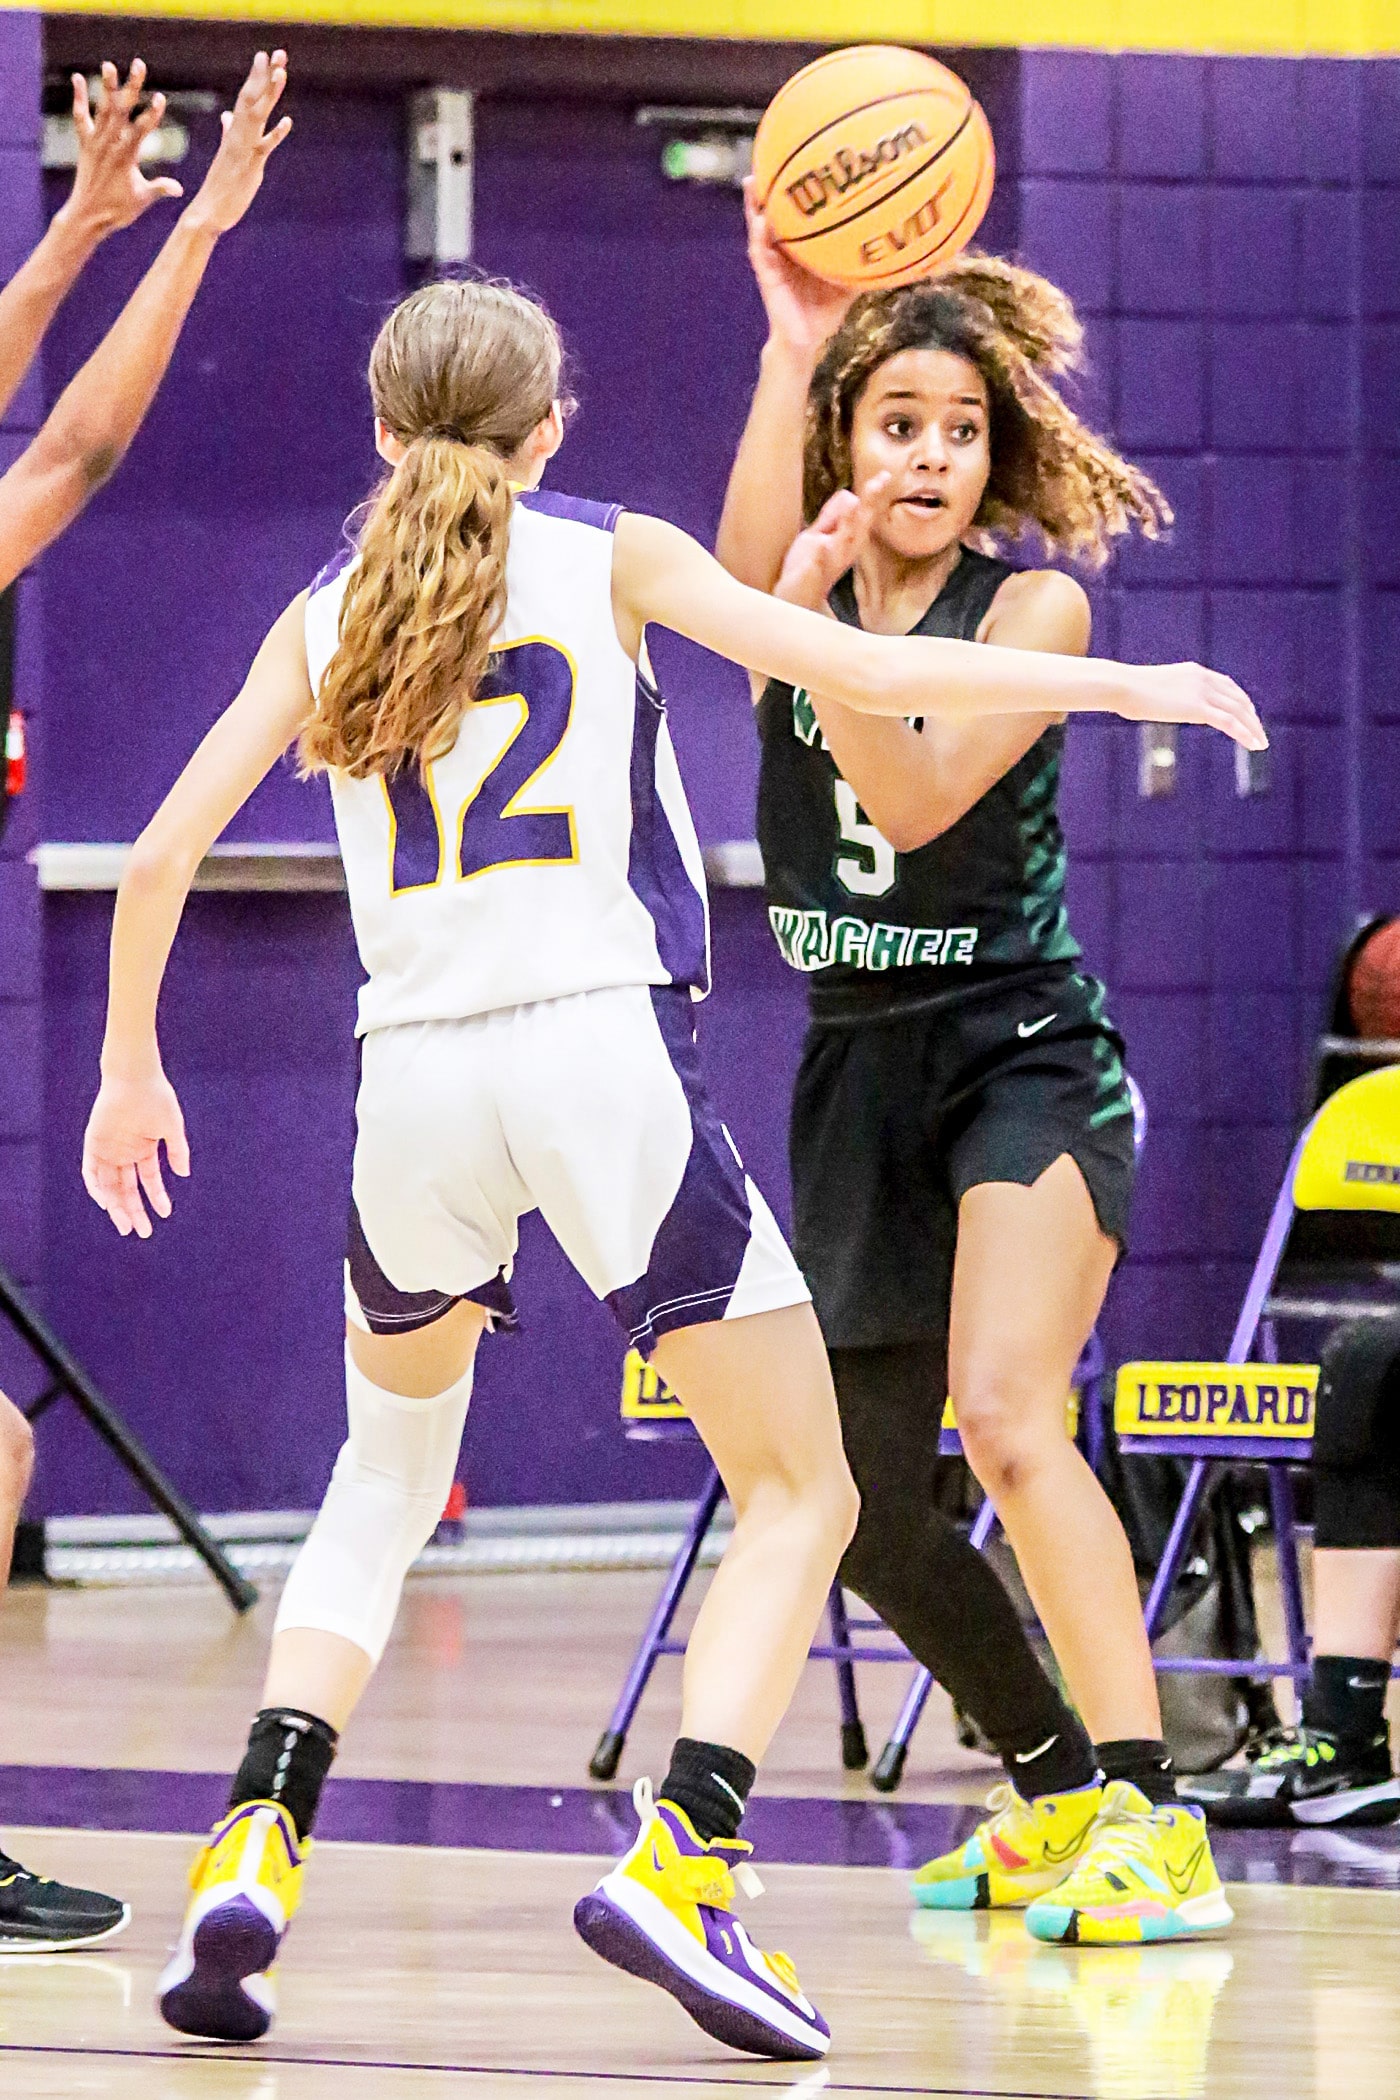 Weeki Wachee Senior #5 Joelysee Morales passes the ball with a pack of Leopards around her. Photo by Cheryl Clanton.